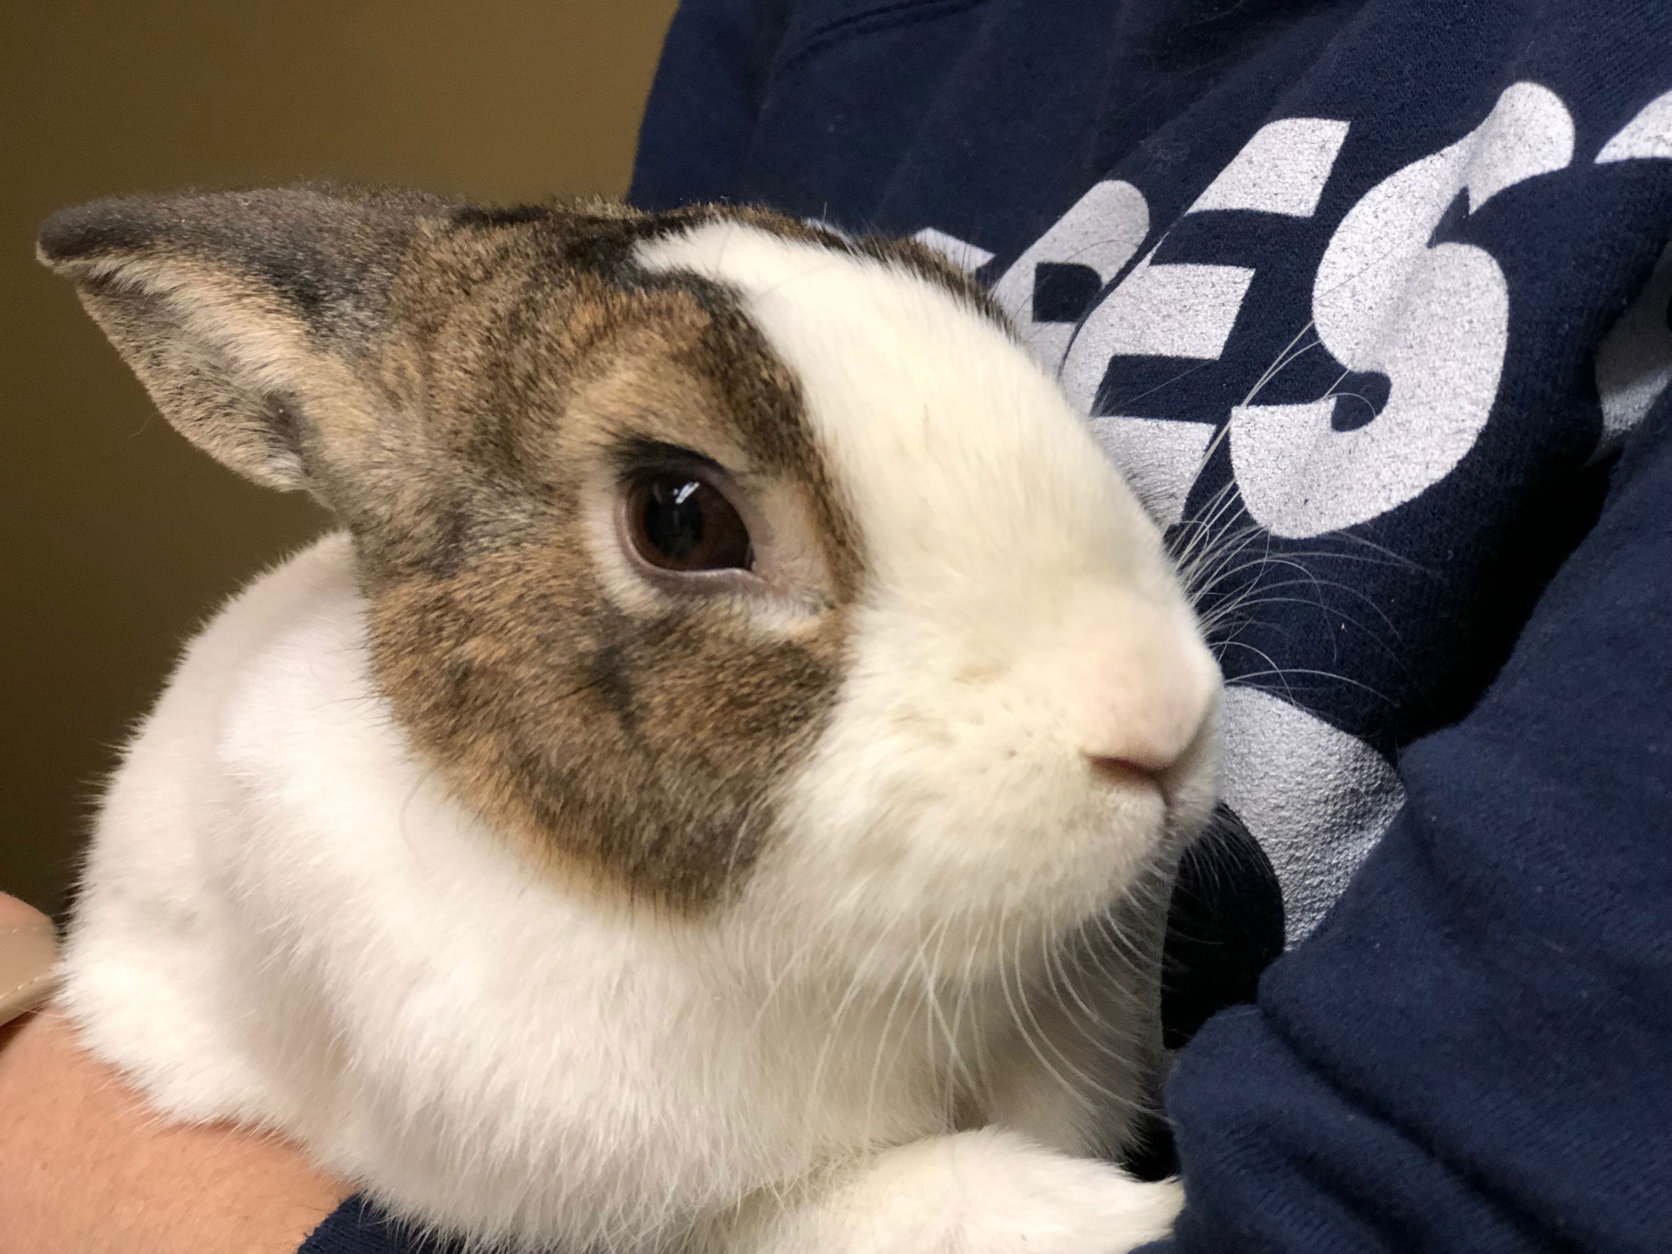 It’s not all puppies and kittens — rabbits such as Swirl here would like a new home. Black Friday adoption events were held at shelters in the region, including the Animal Welfare League of Arlington. (WTOP/Kate Ryan)